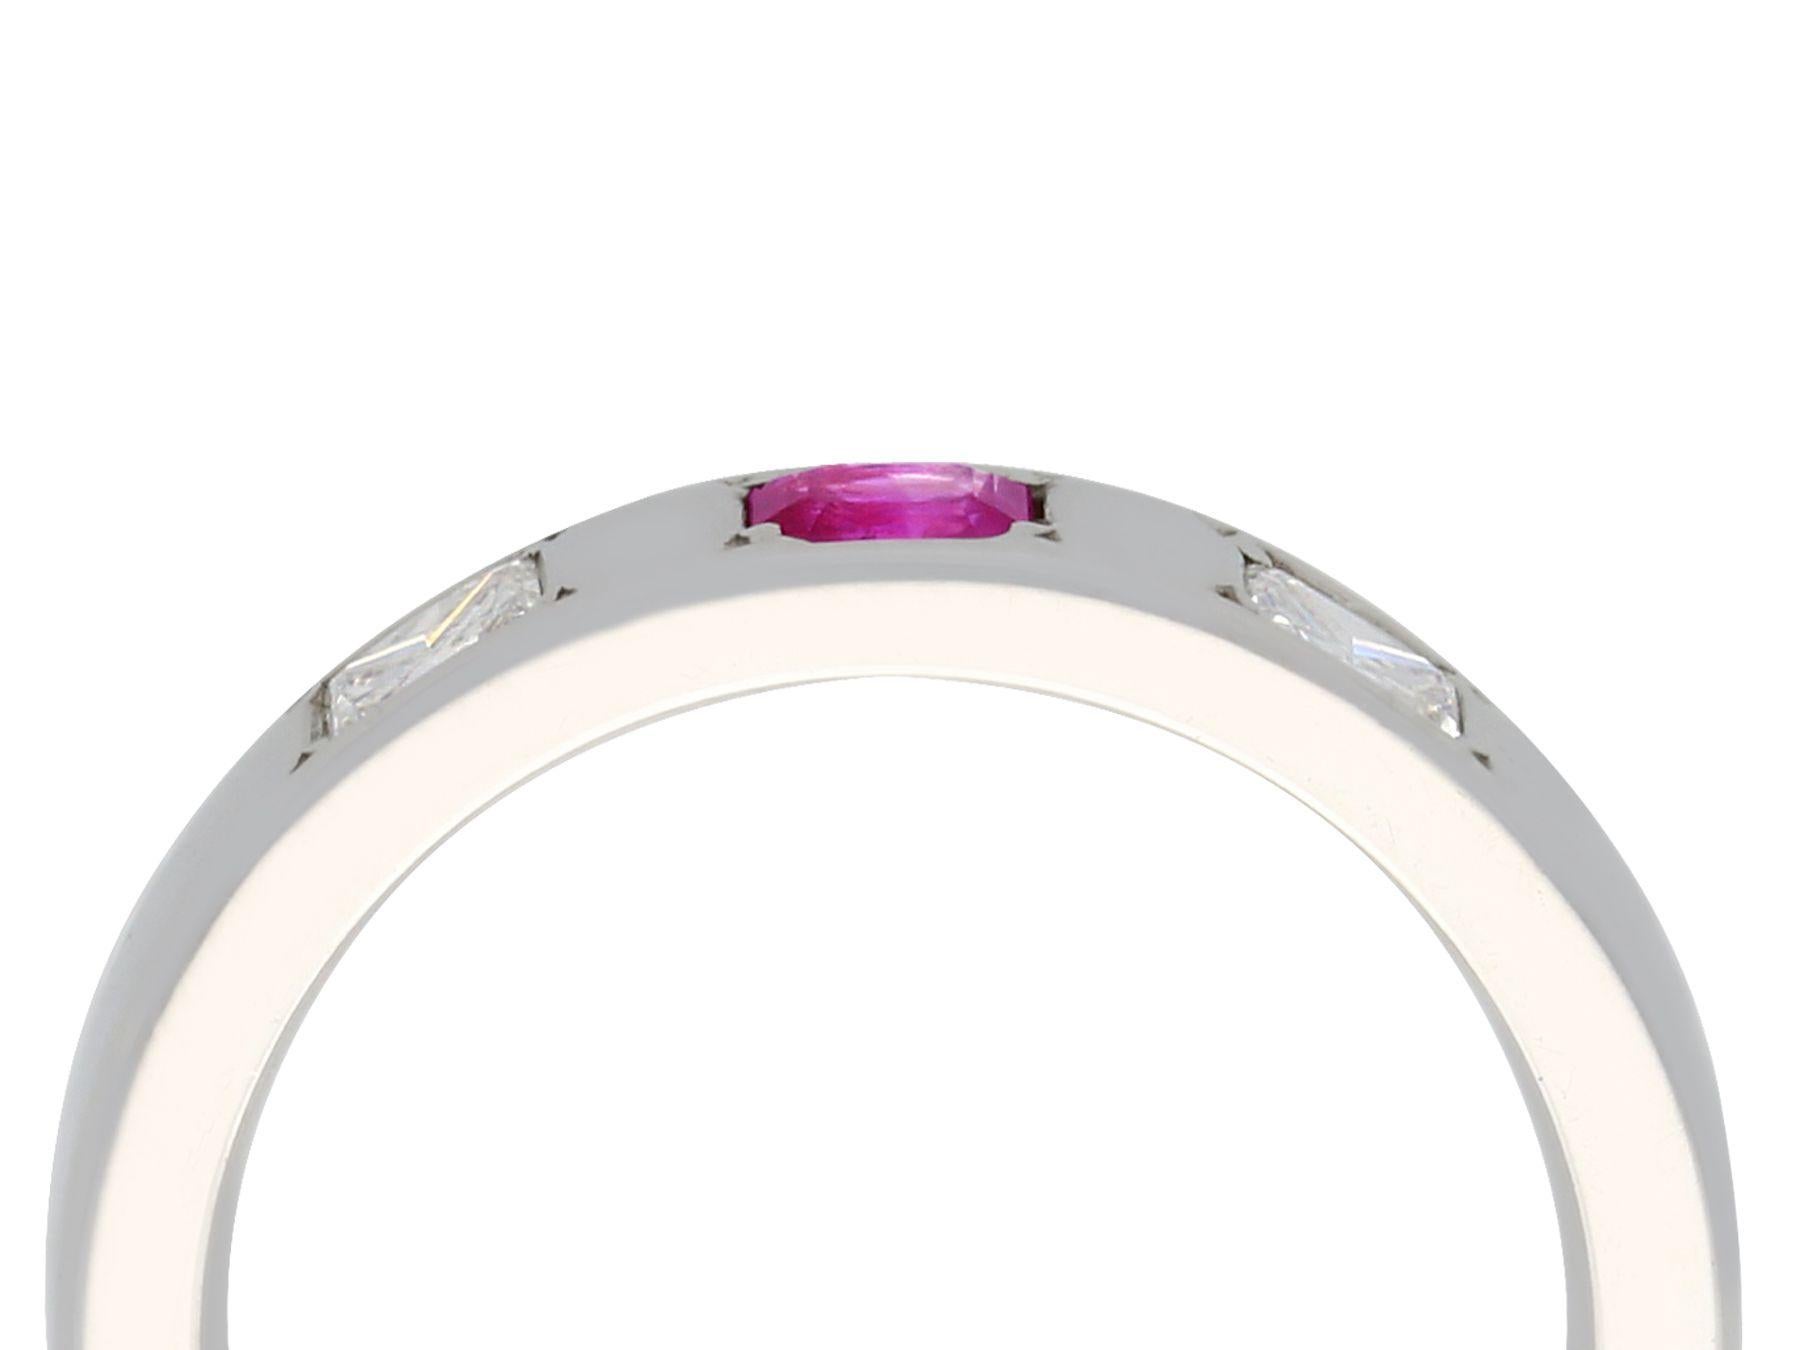 A fine contemporary princess cut 0.25 carat diamond and 0.13 carat natural ruby, 18 karat white gold ladies ring; part of our ruby jewellery collections.

This fine contemporary ruby ring has been crafted in 18k white gold.

The plain band is